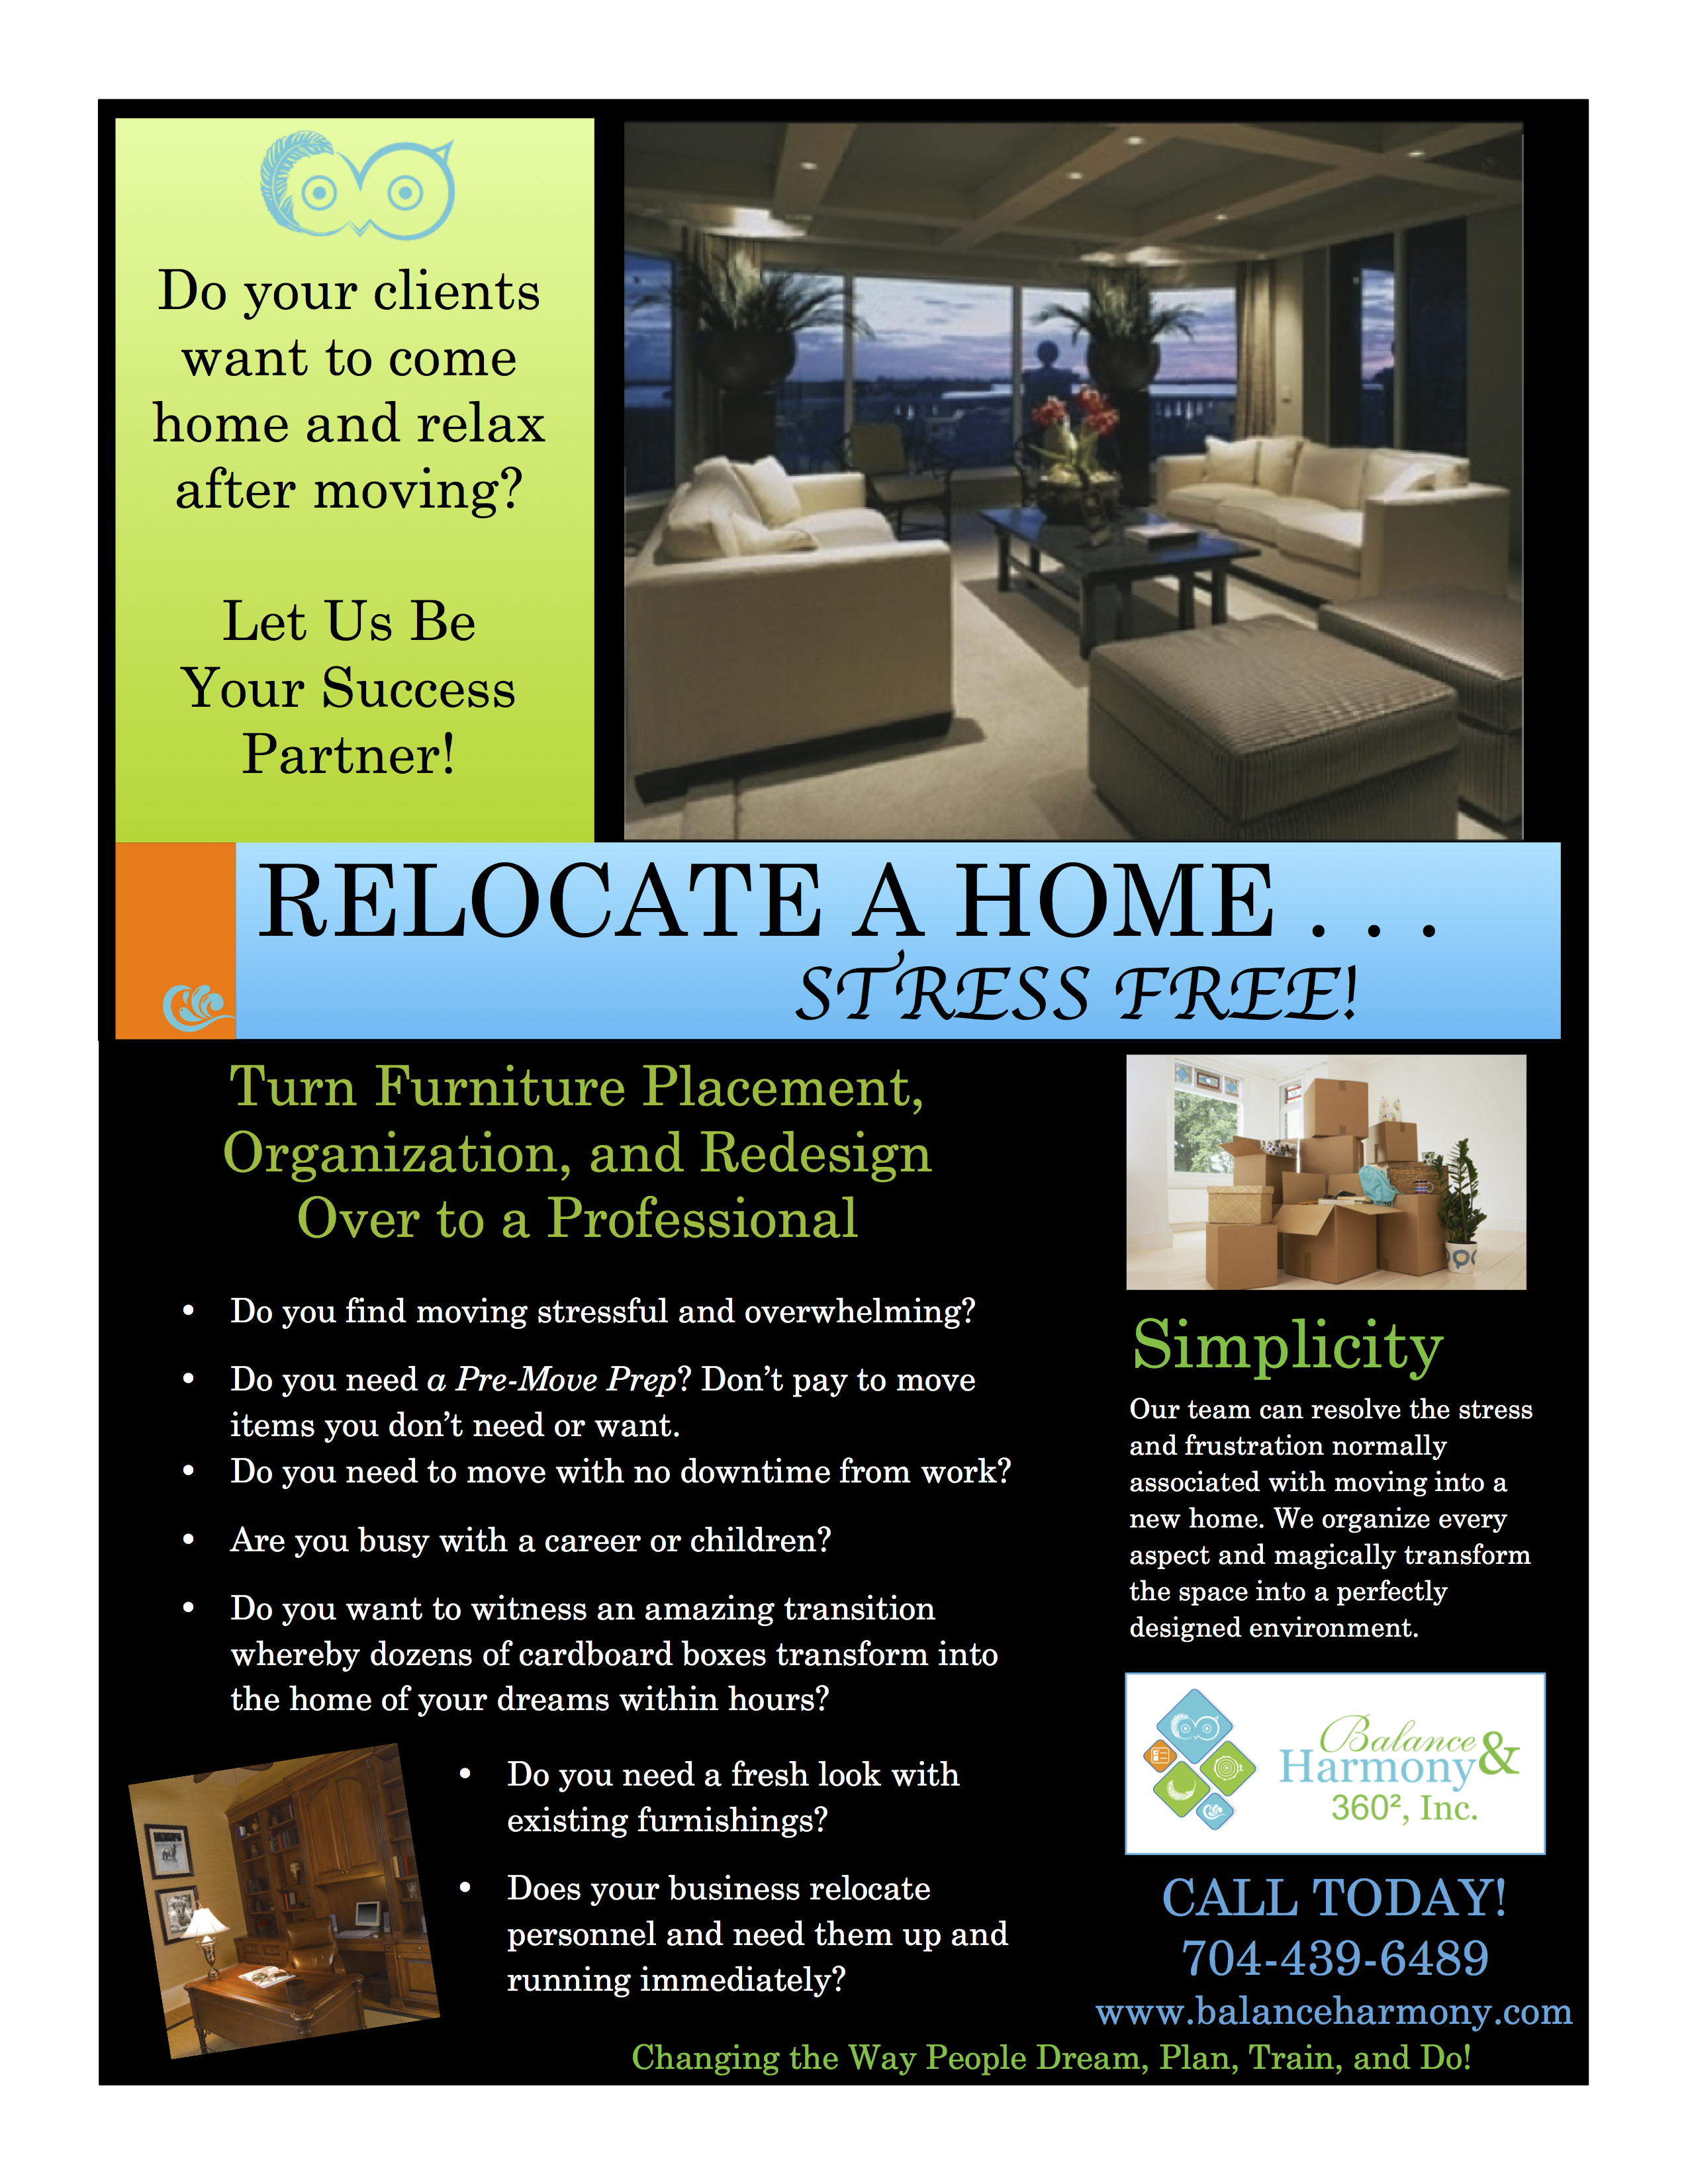 Relocate Your Home . . . Stress Free